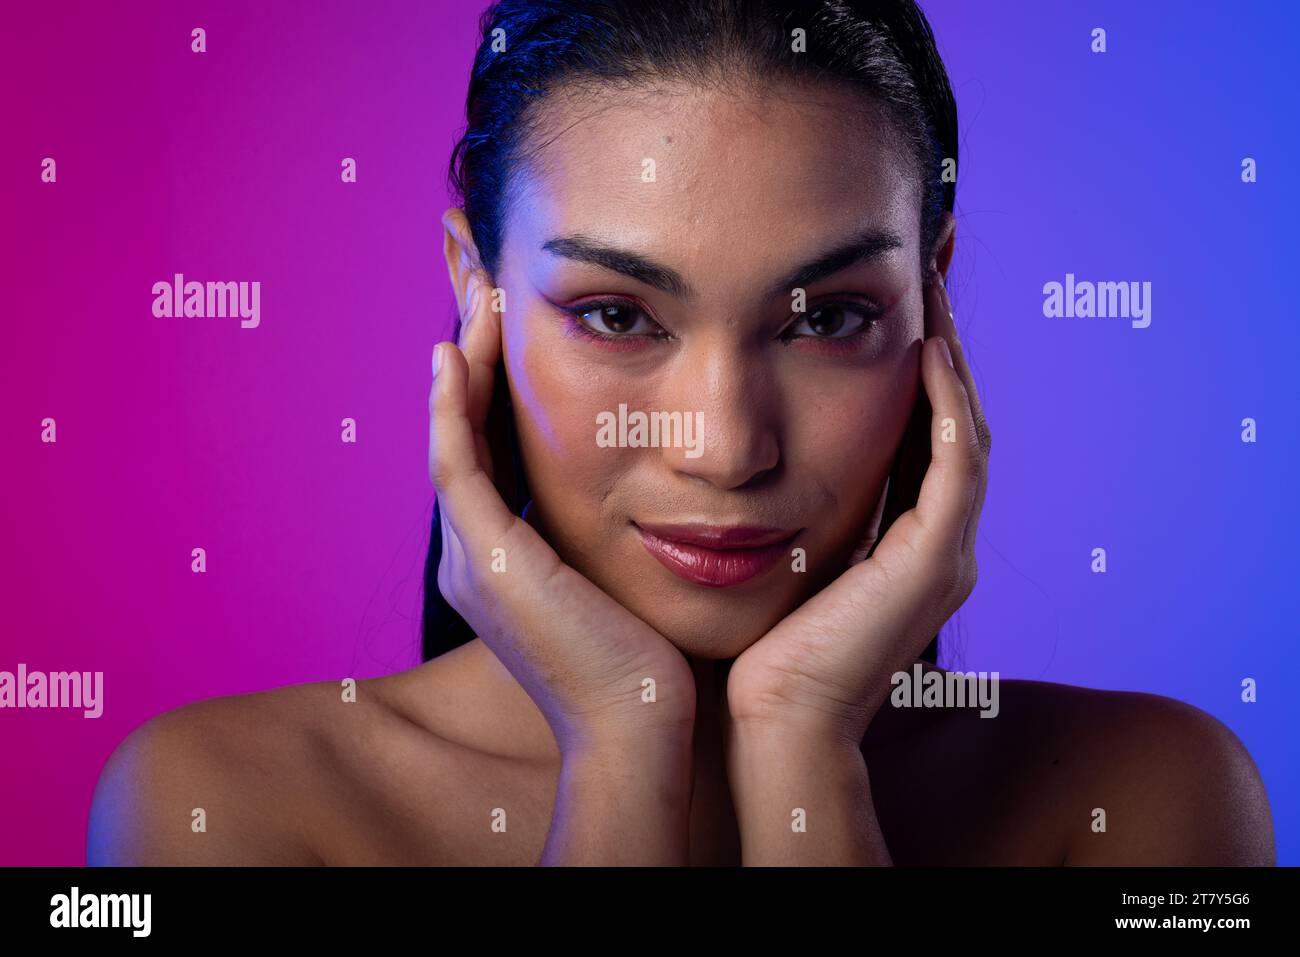 Biracial woman with dark hair, hands to face, red lips, eyeshadow make up on neon background Stock Photo